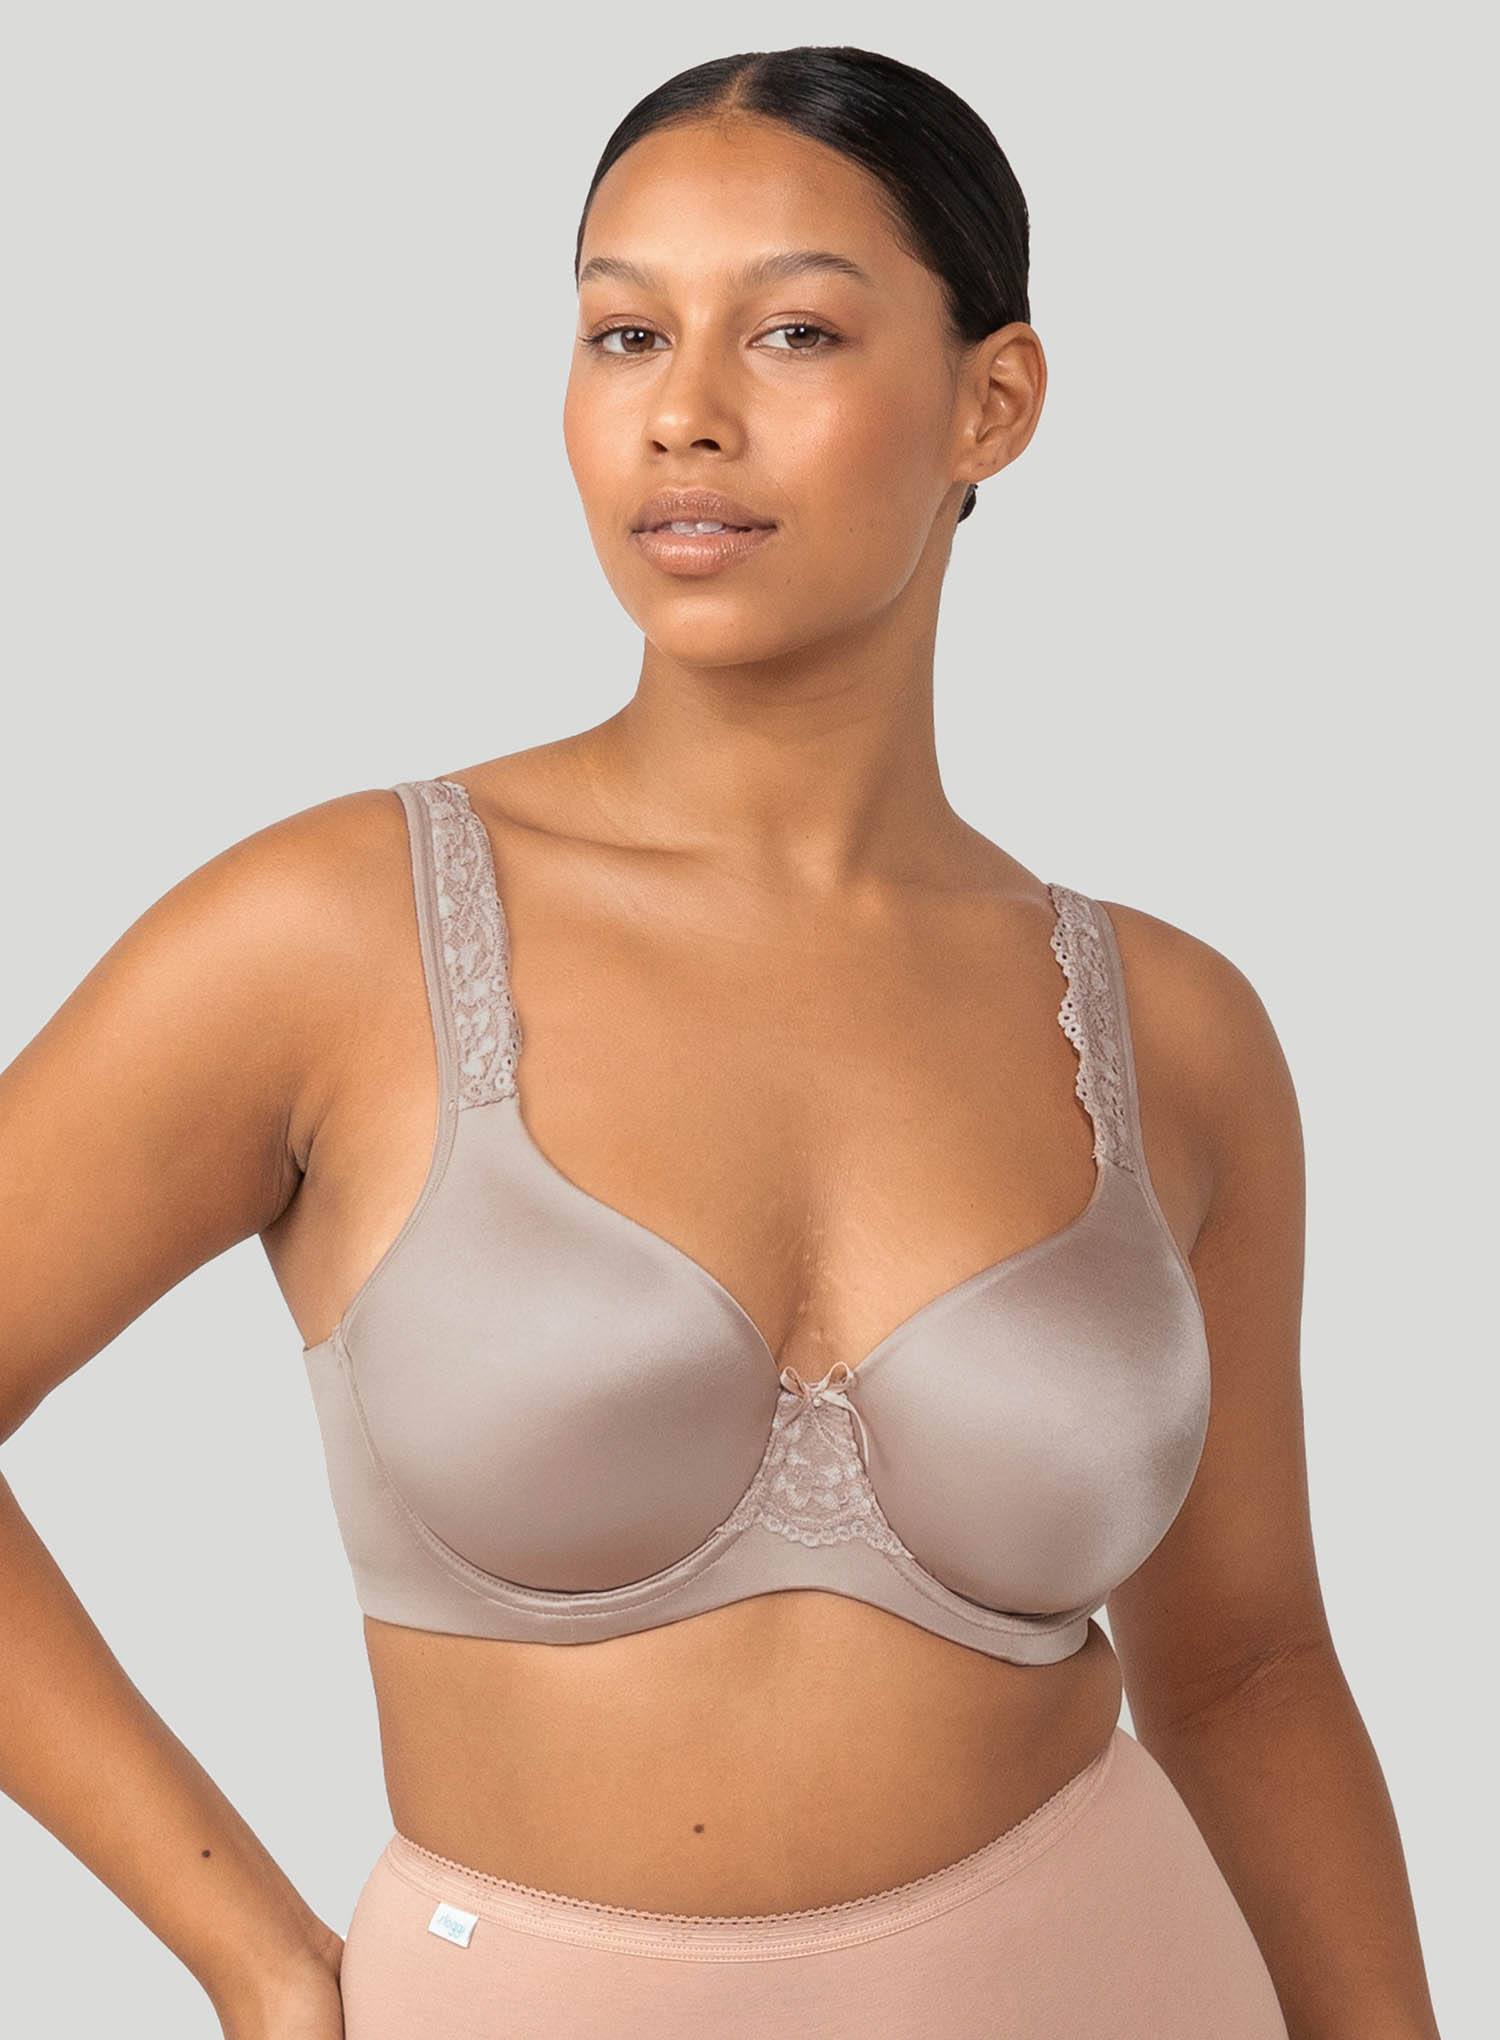 Pour Moi Bra and Panty By Triumph, my new favourite from Tr…